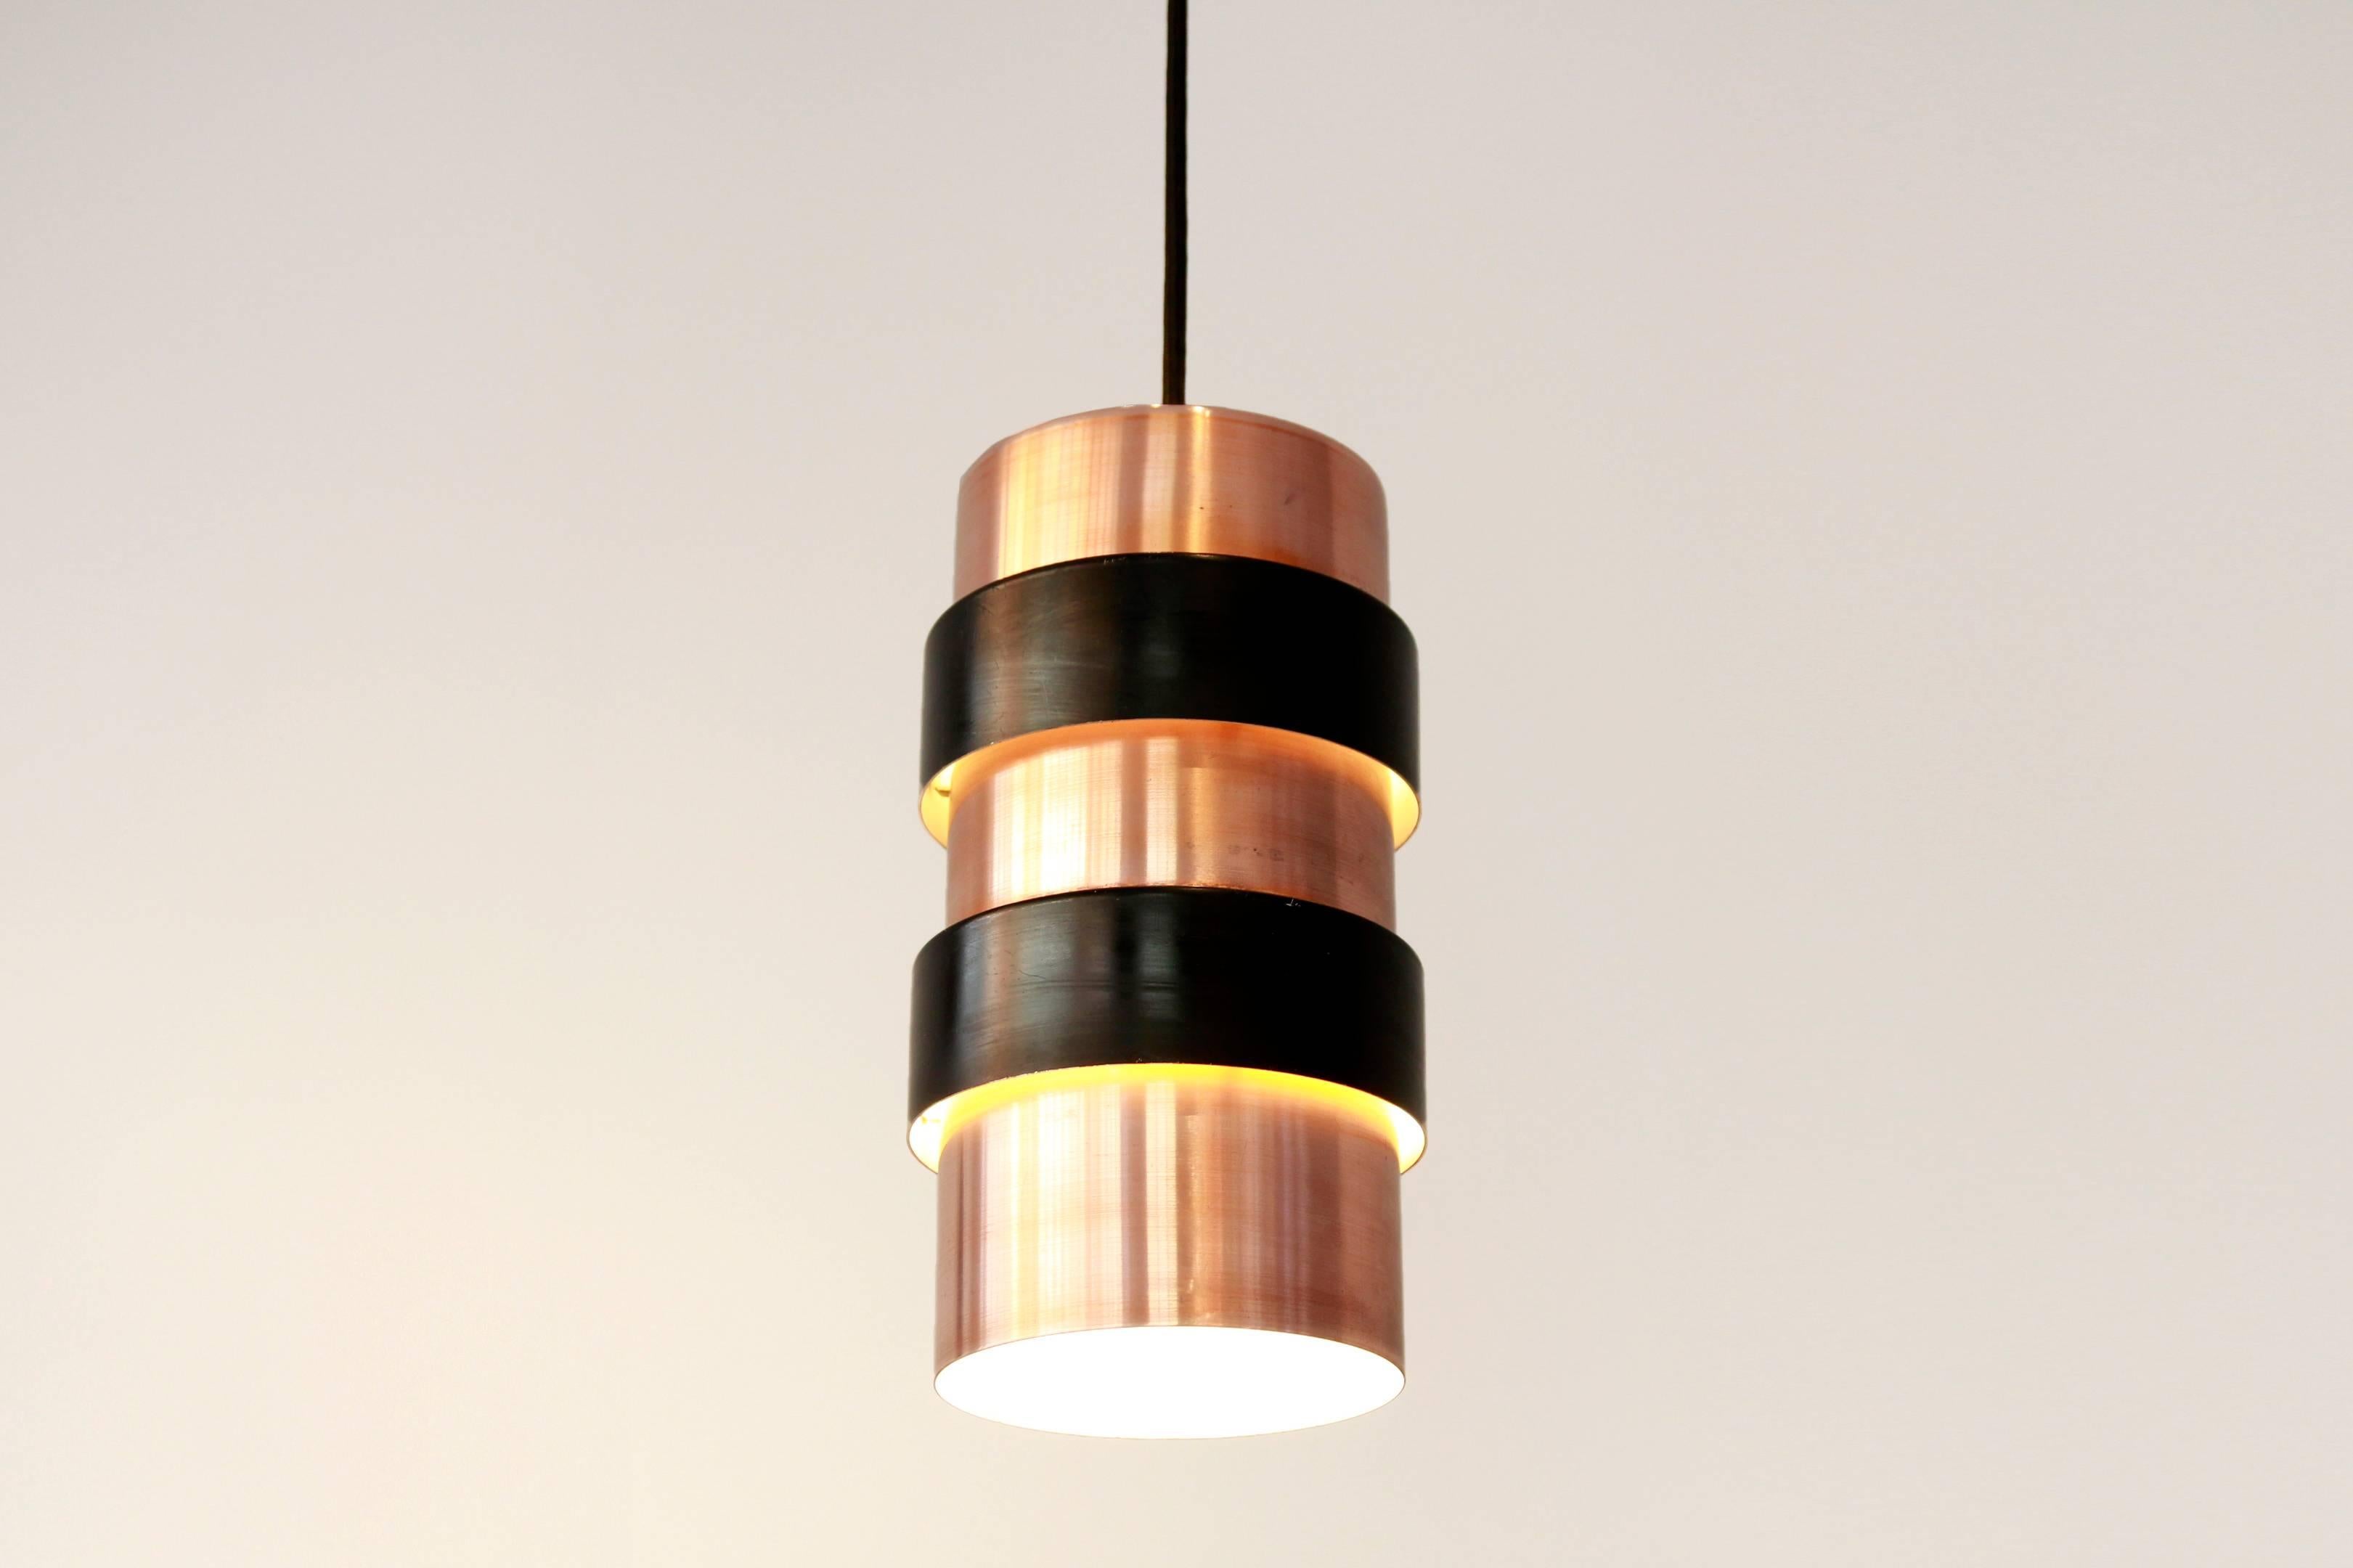 Copper pendant hanging lamp with black rings designed by Jo Hammerborg and produced by Fog and Mørup, Denmark in the sixties. The lamp has a standard E27 fitting and a new black fabric cable.